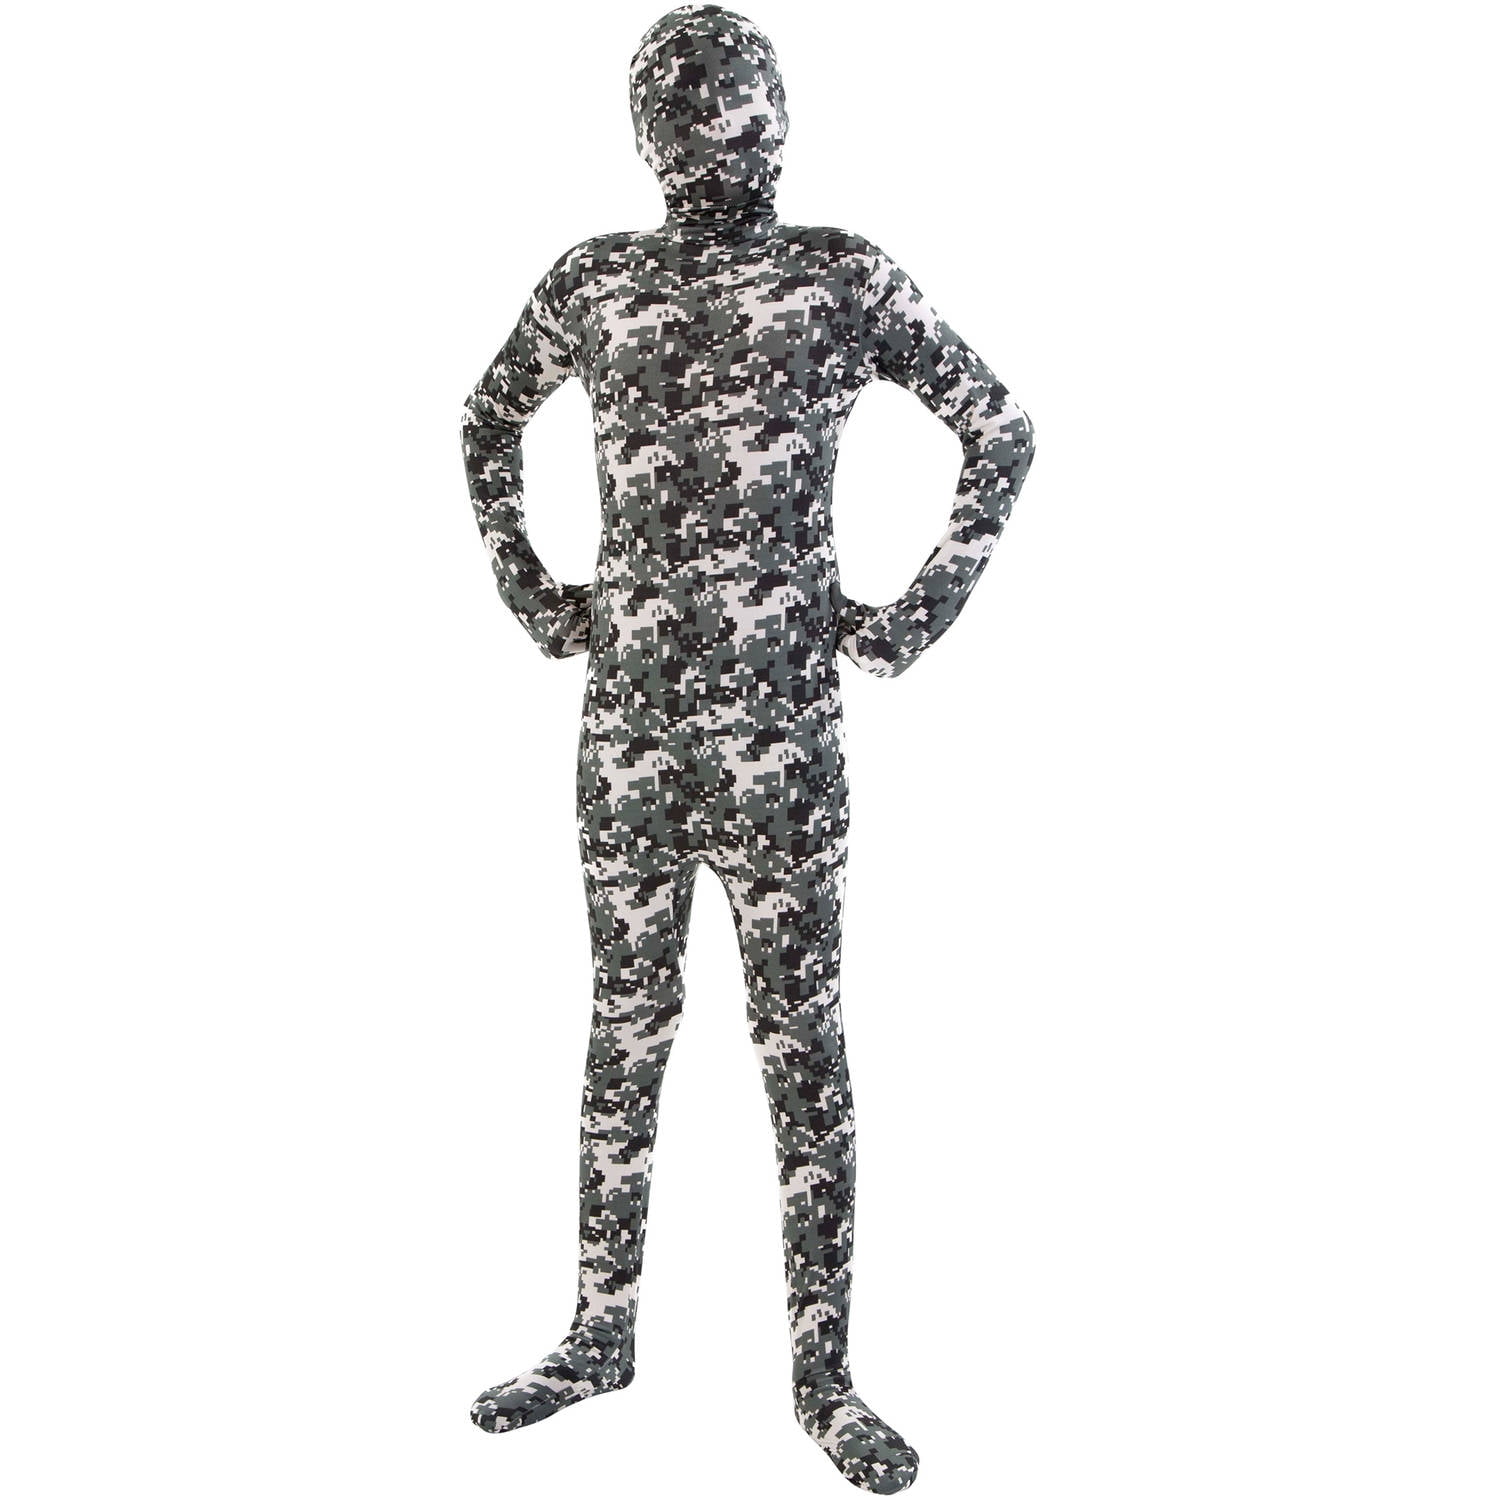 Morphsuits USA Camouflage Premium Original Morphsuit Adult Costume Ships From USA MPCO 